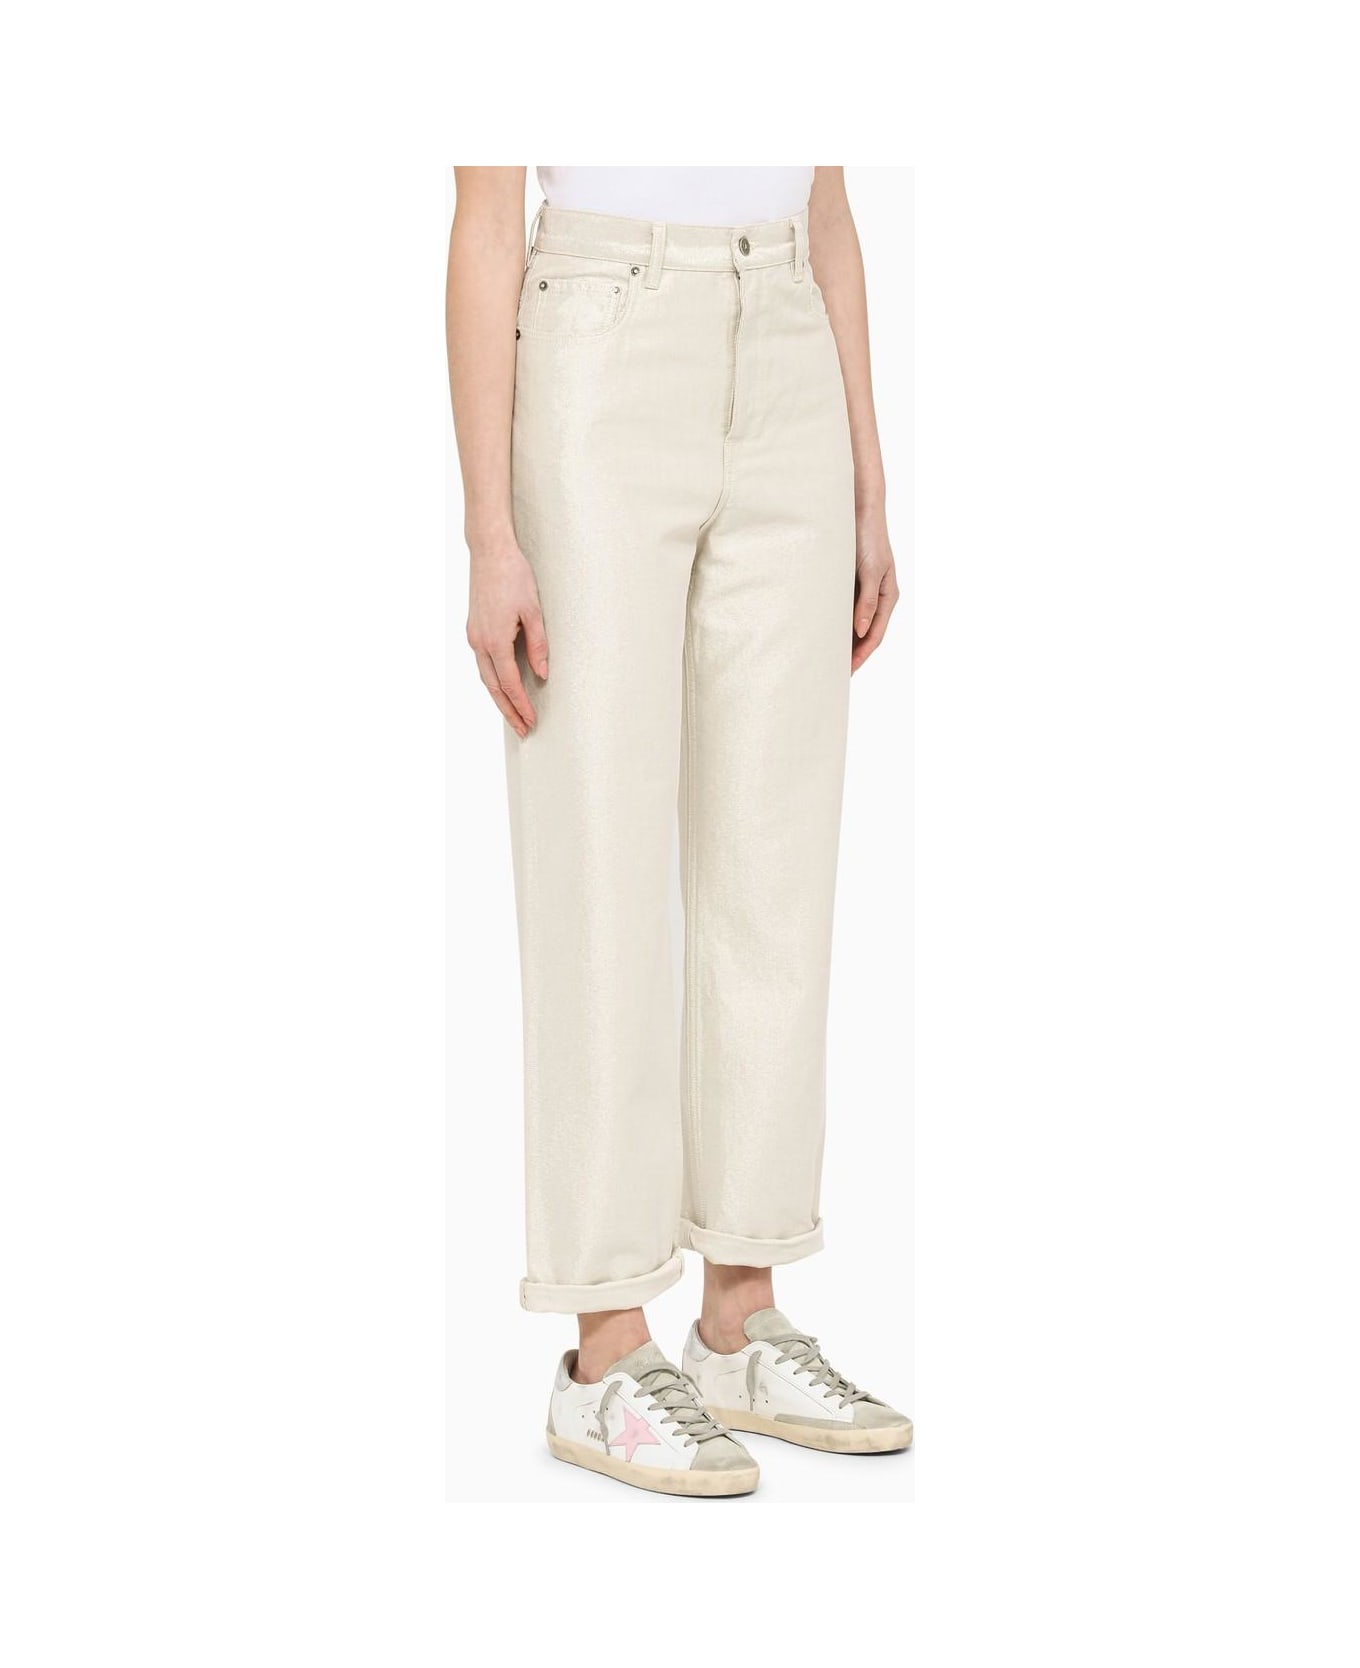 Golden Goose Ivory Coated Jeans - 10190 ボトムス